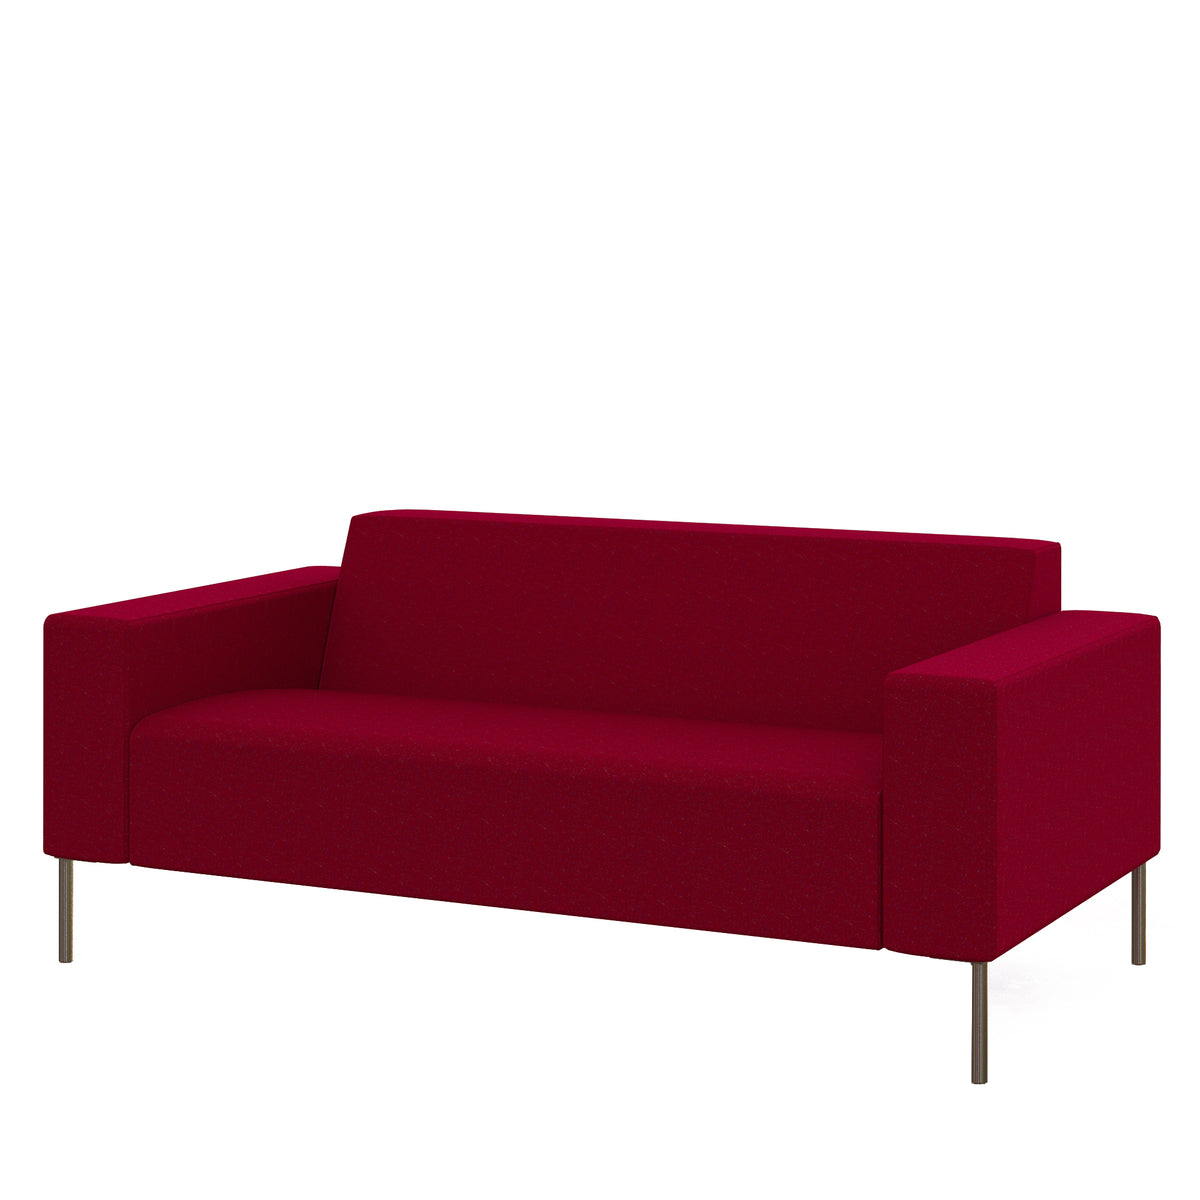 Hitch Mylius Office HM18 Kilburn Origin Two Seat Sofa with Brushed Stainless Steel Legs